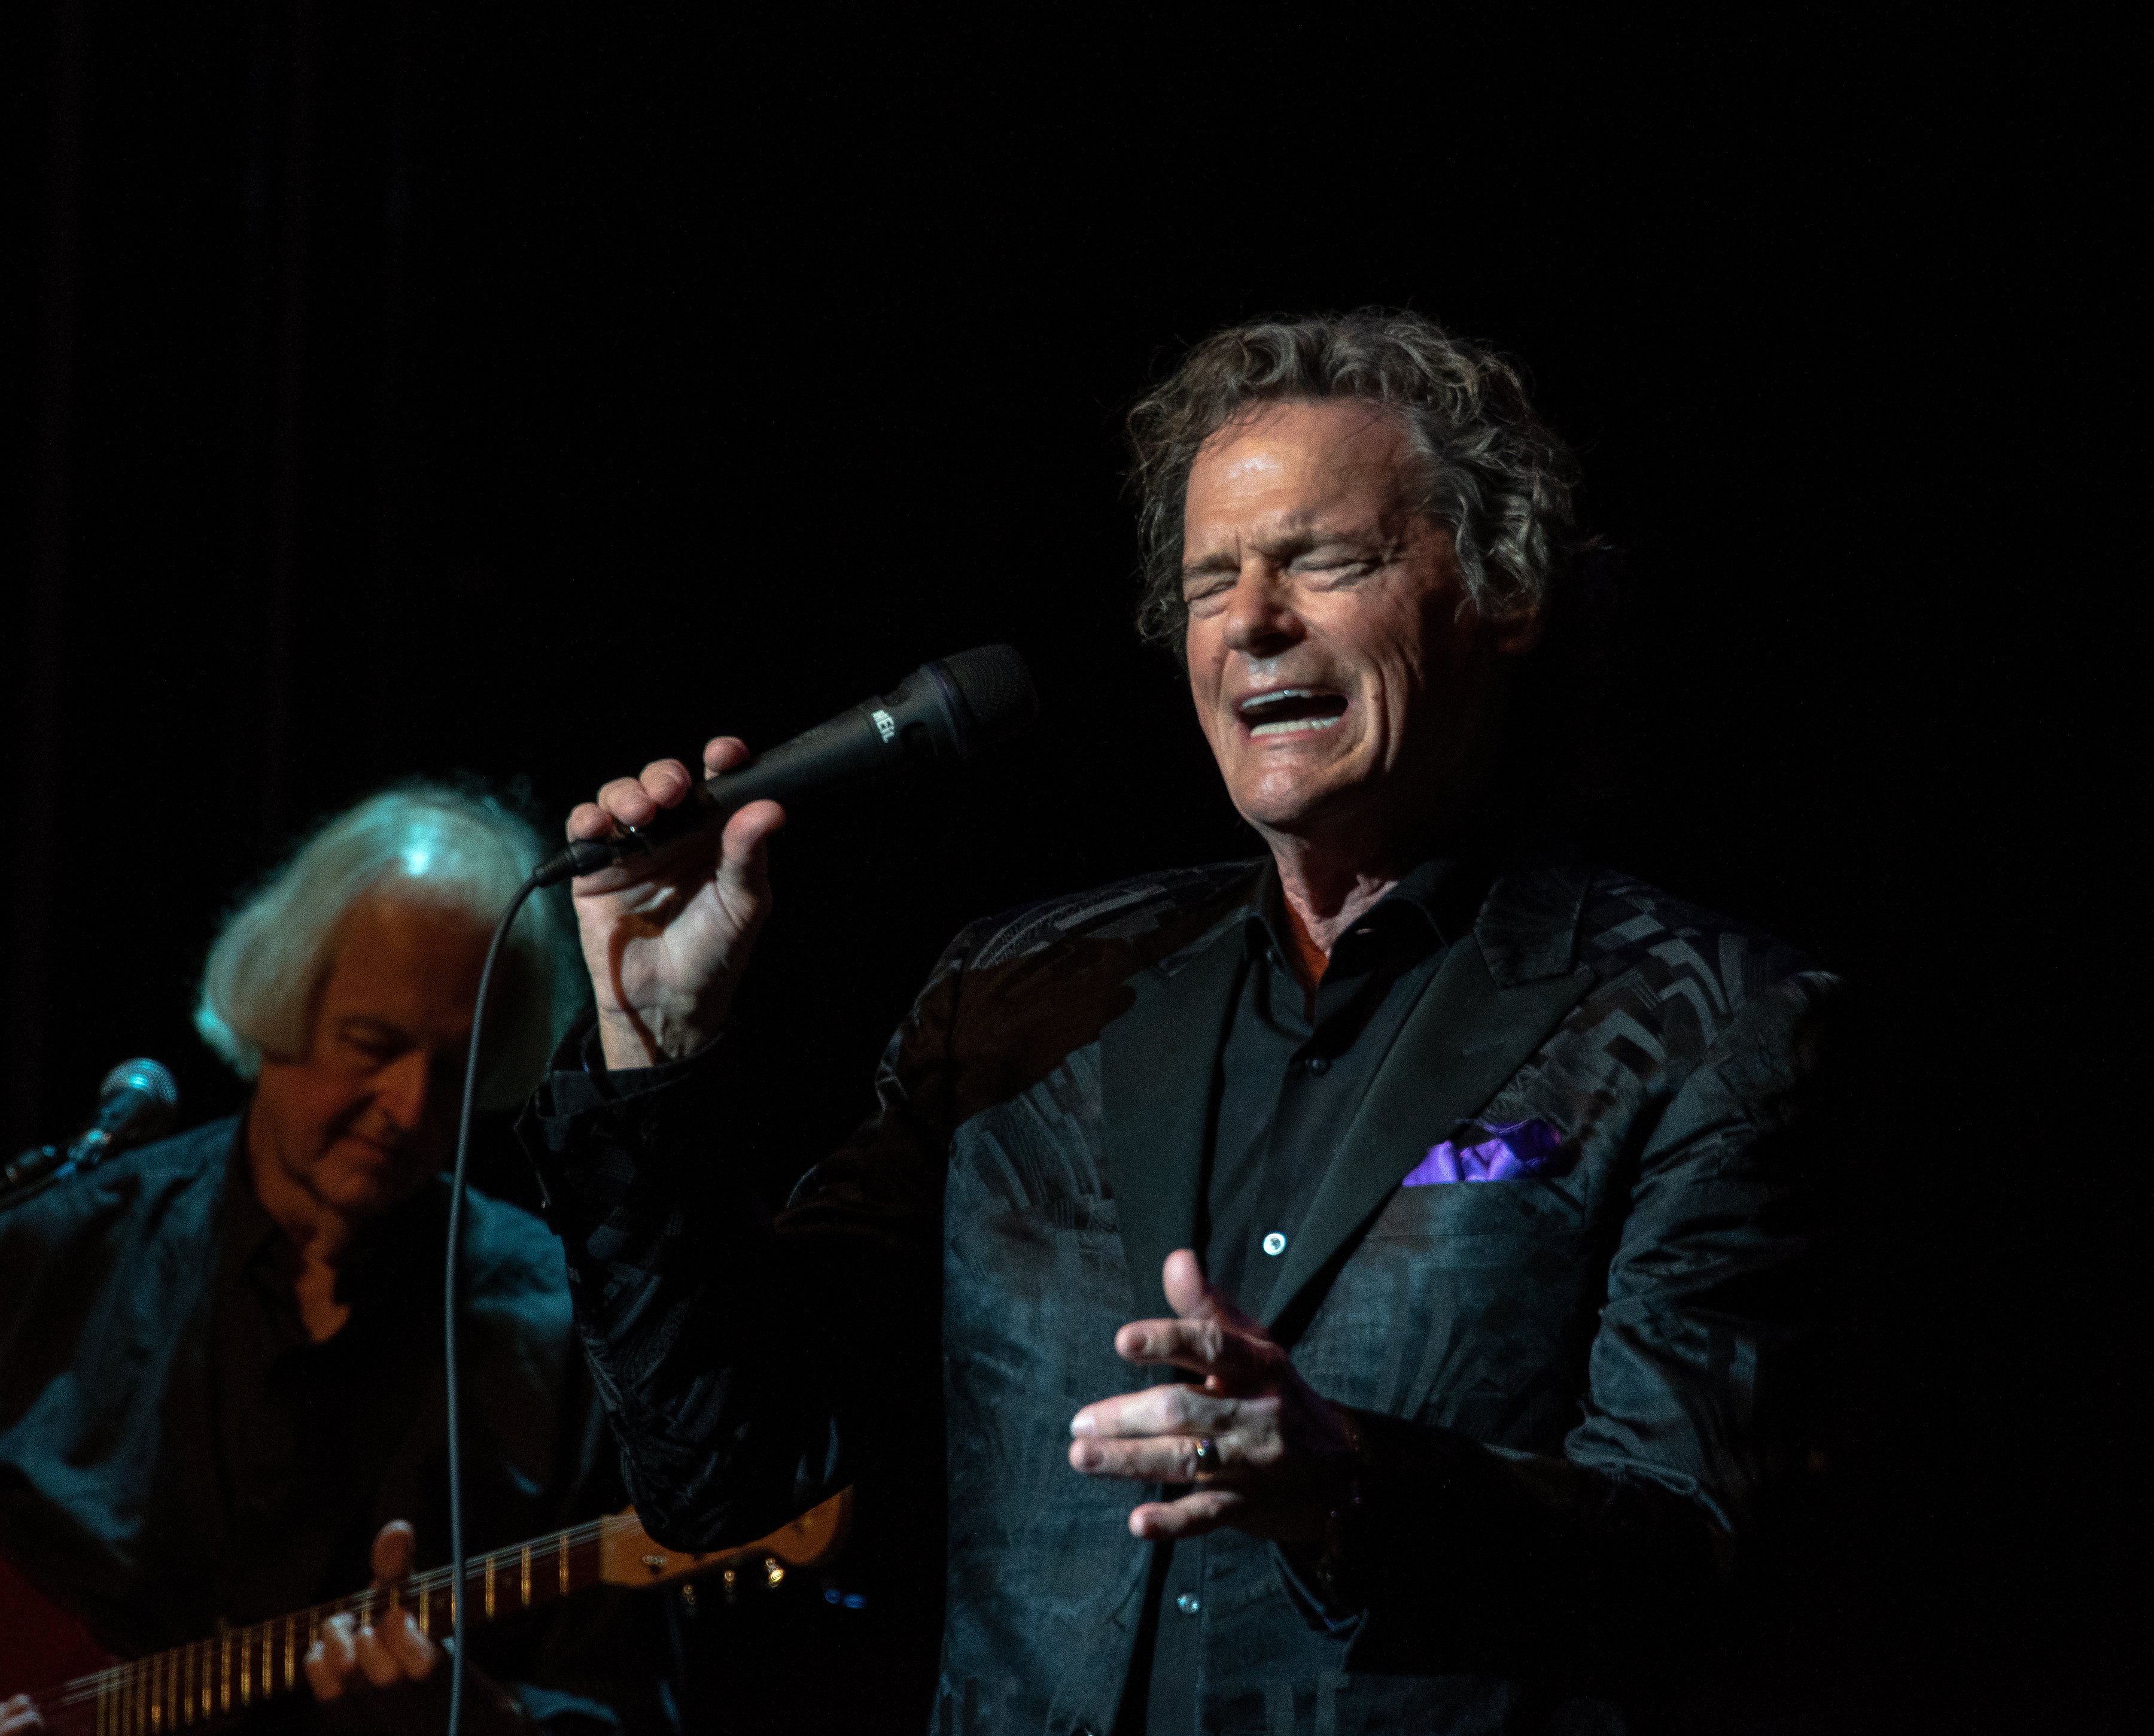 BJ Thomas performs on stage at the historic Granada Theater | Photo: Shutterstock